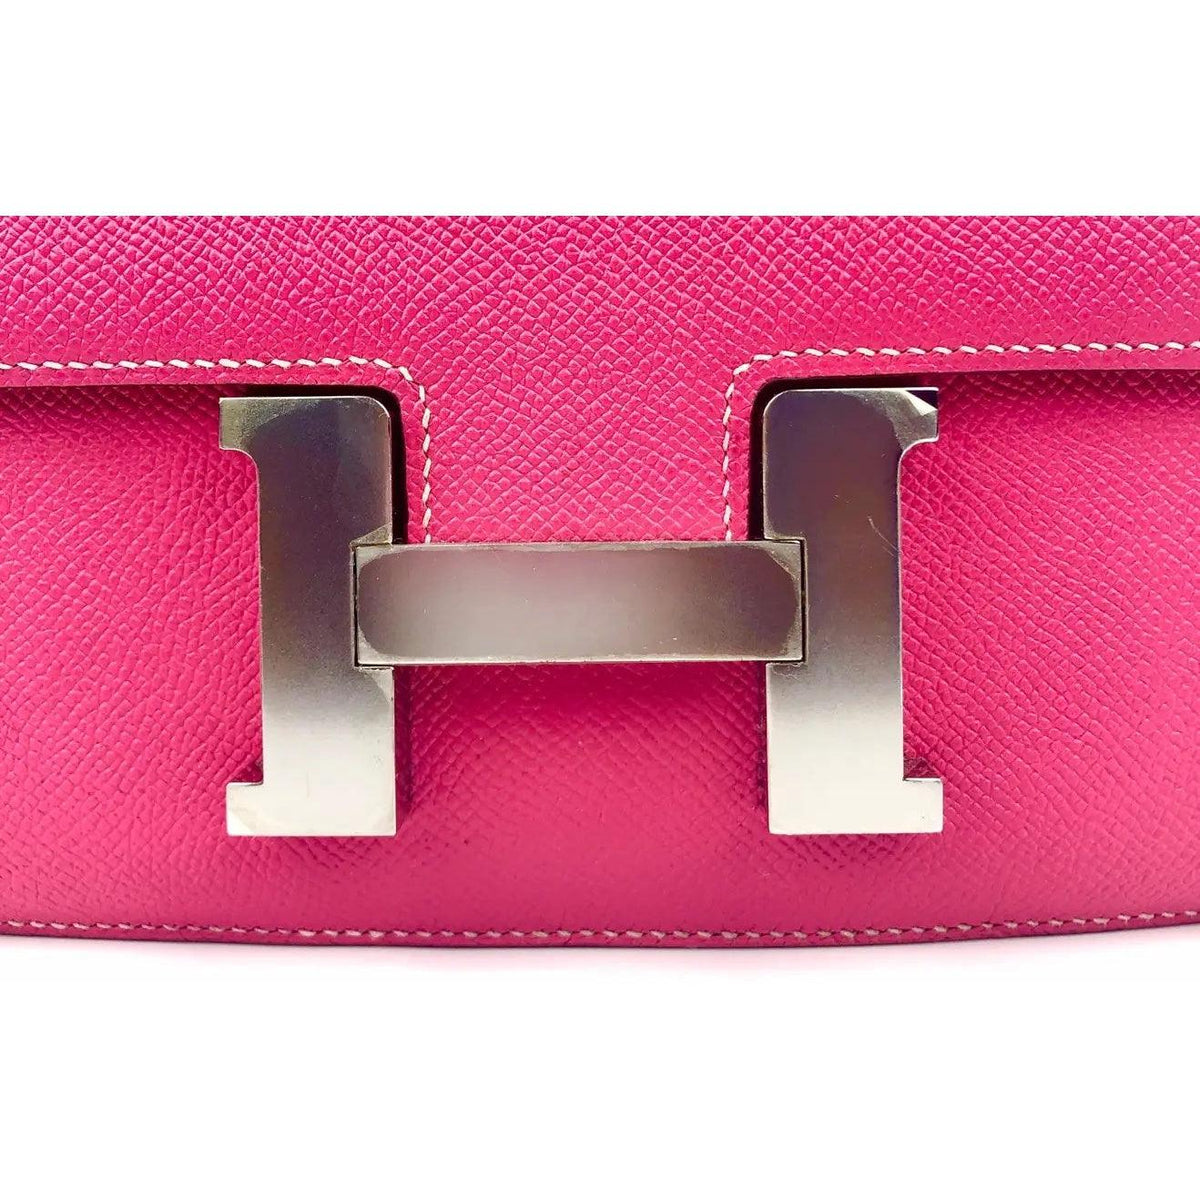 Pre-owned HERMES Constance 24 Rose Tyrien Pink Epsom Leather Bag - theREMODA